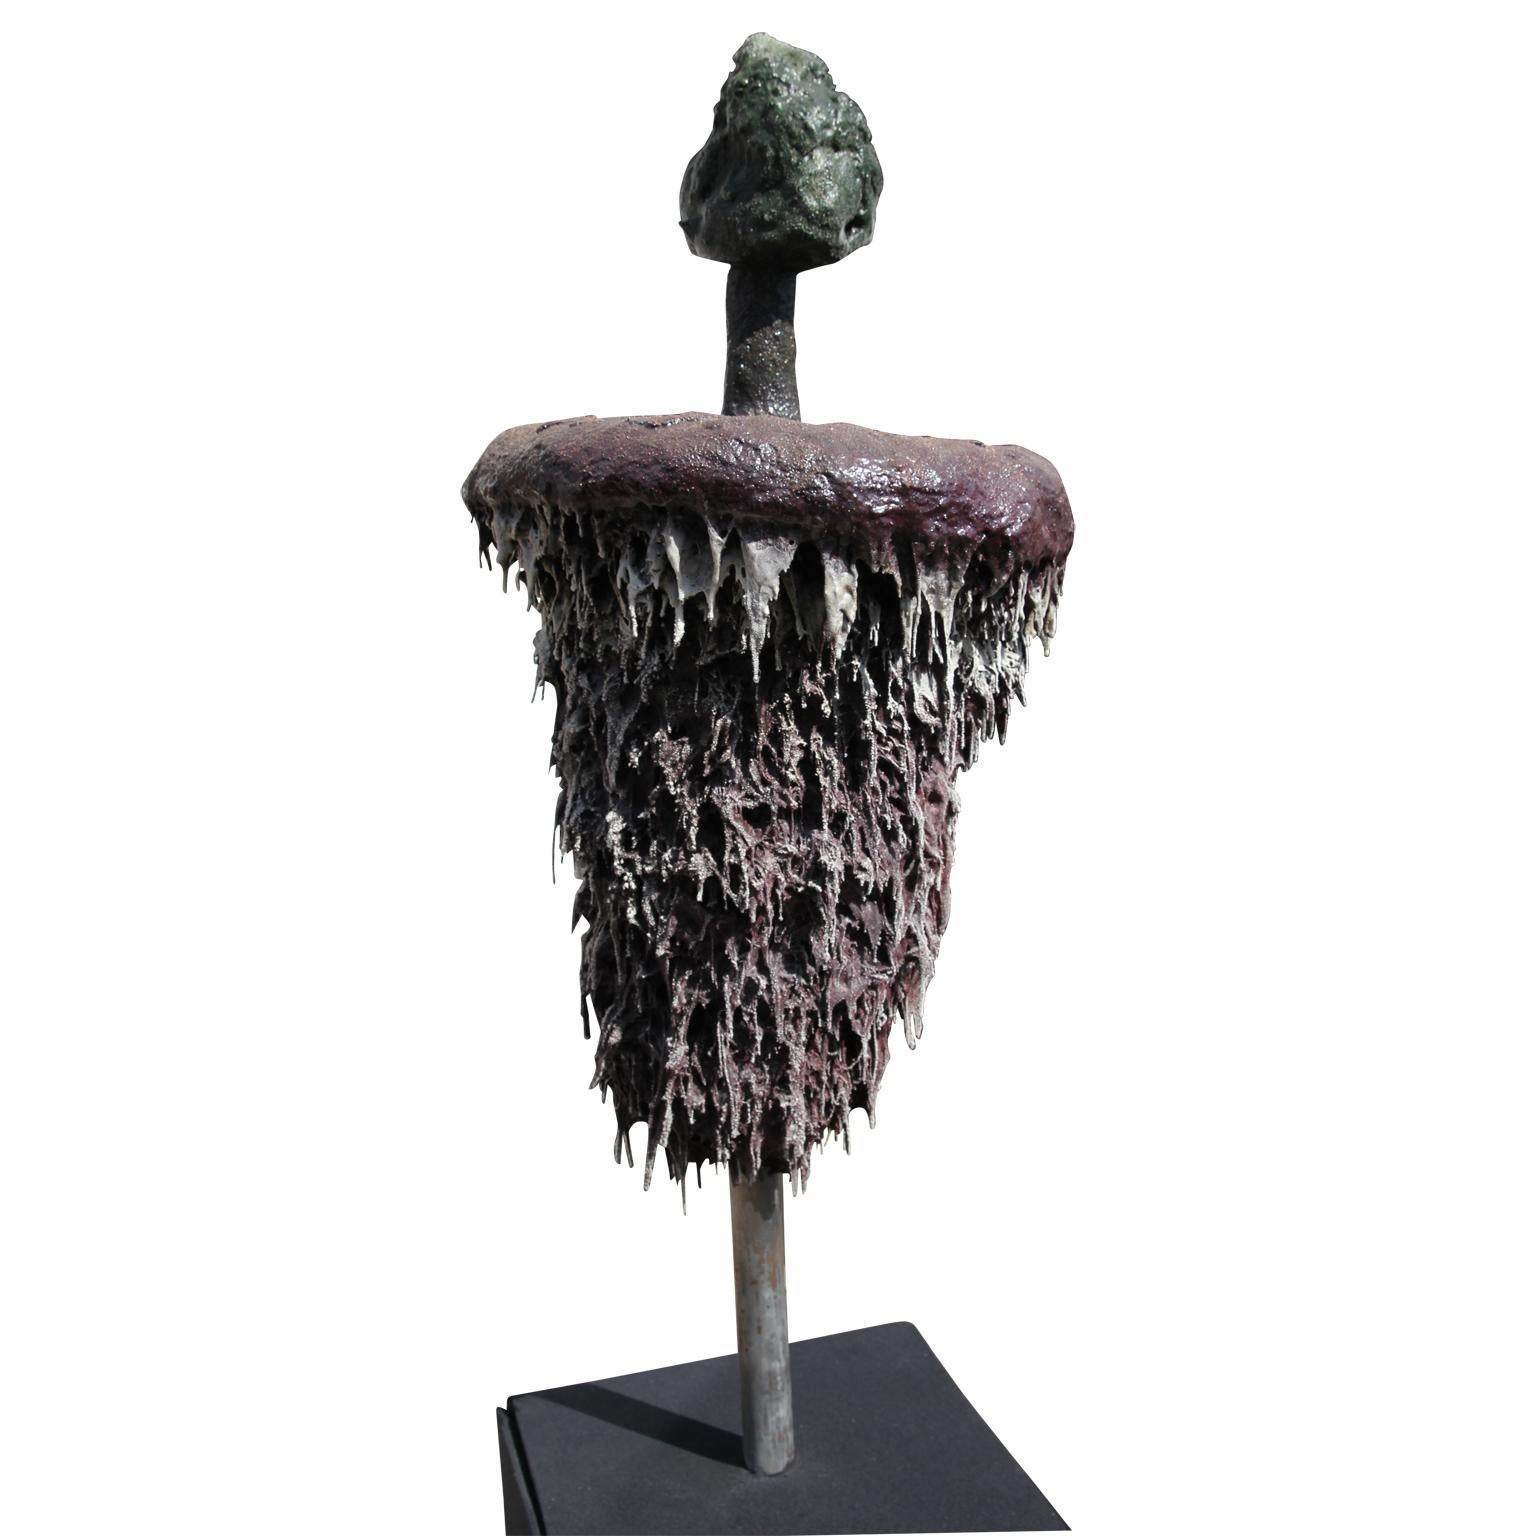 “Ballast for Memory” Dark Toned Avant-Garde Heavily Textured Clay Sculpture - Black Abstract Sculpture by Patrick McSwain